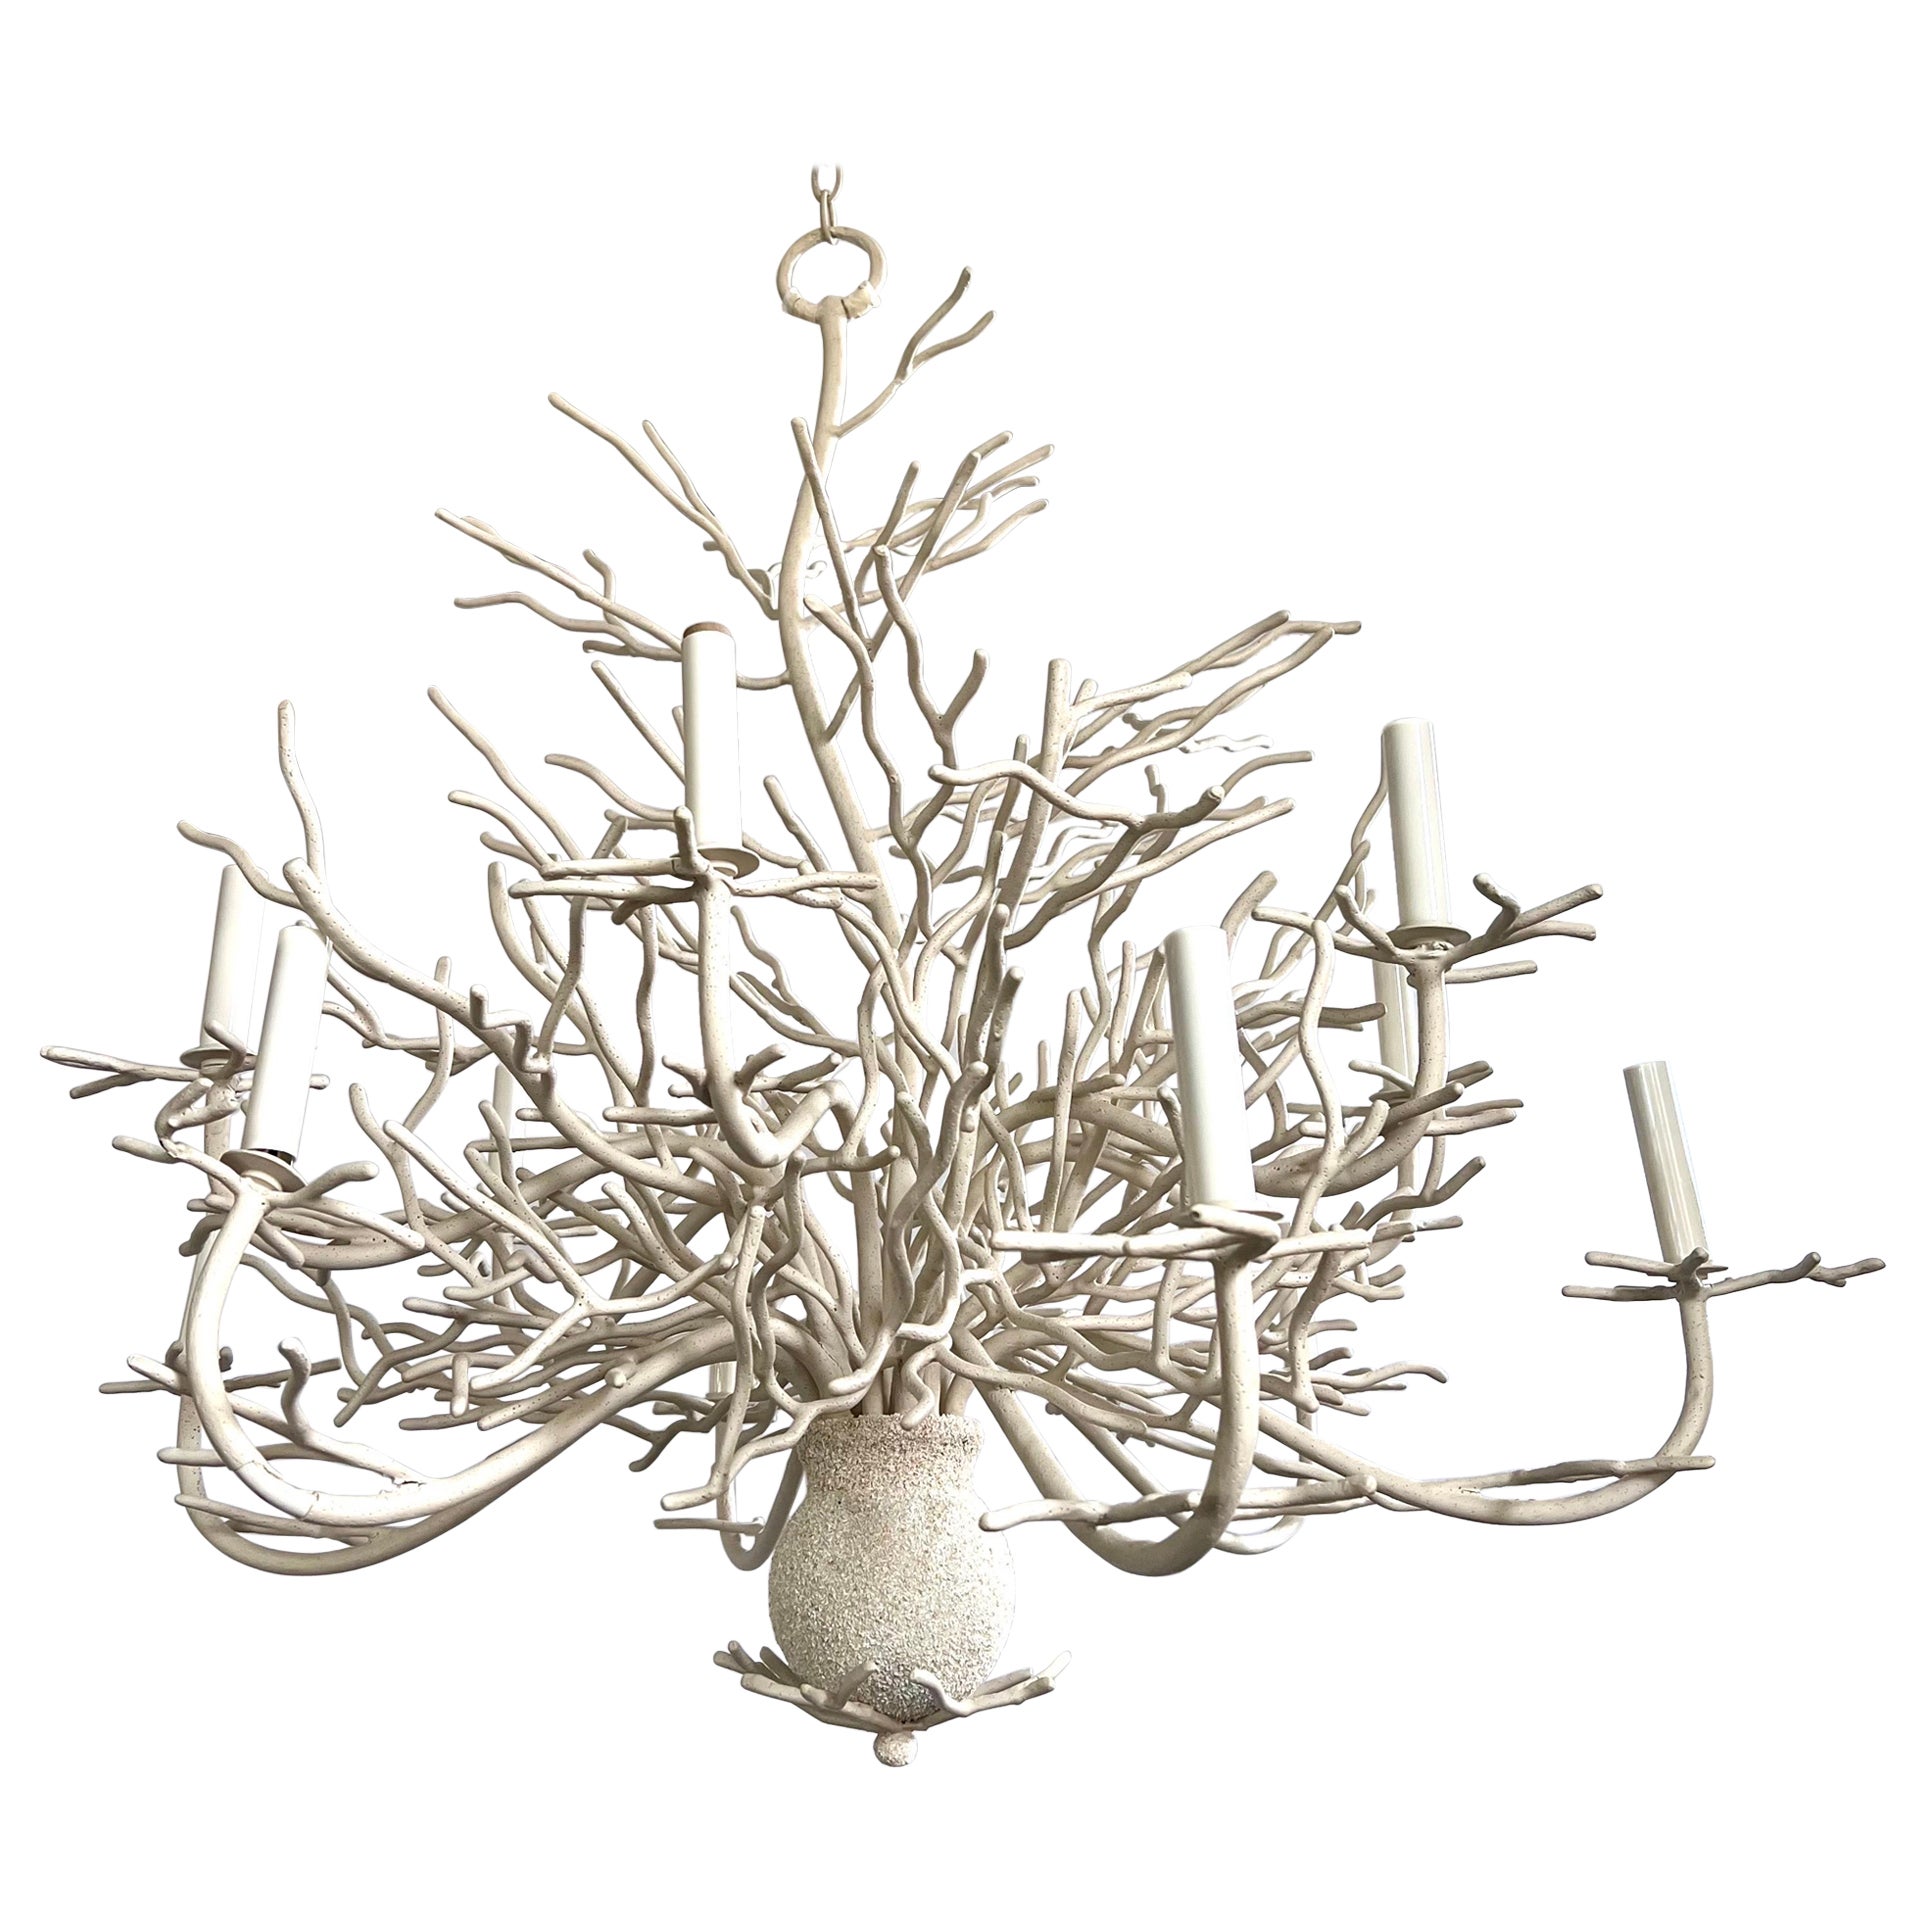 Organic Form Seaward White Coral 37" 12 Arm Large Chandelier For Sale